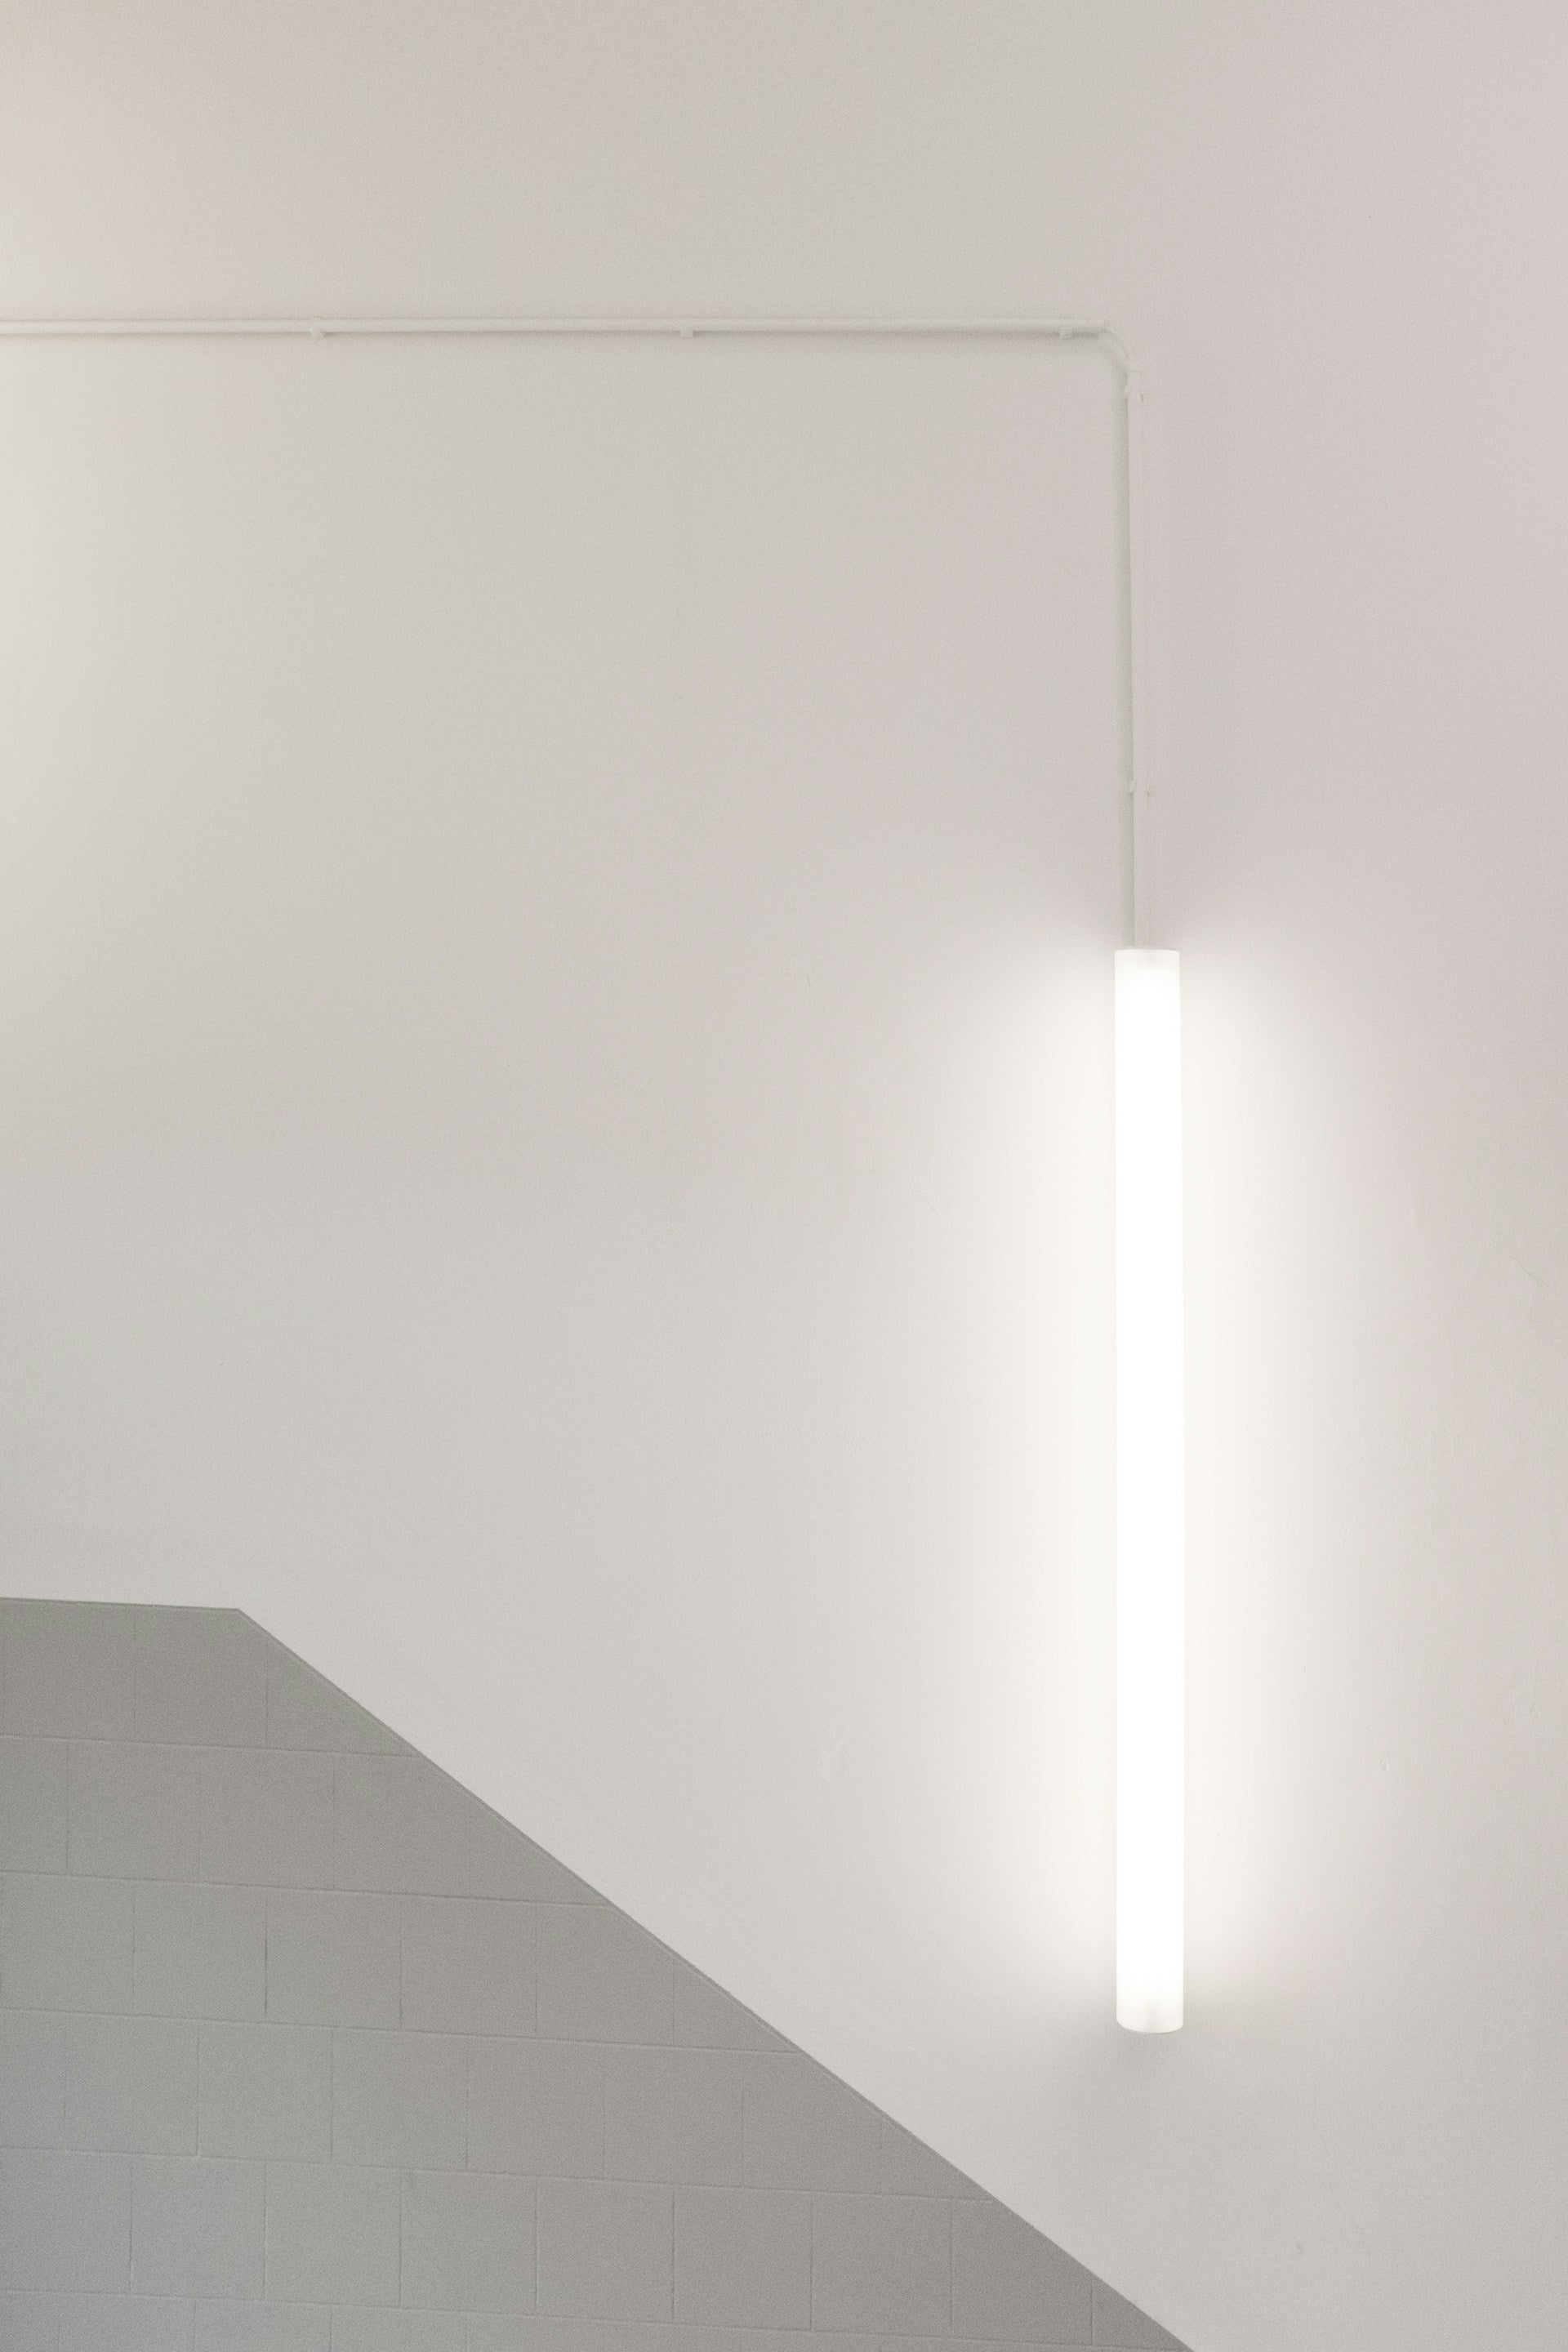 A white wall with a light fixture hanging from the ceiling.